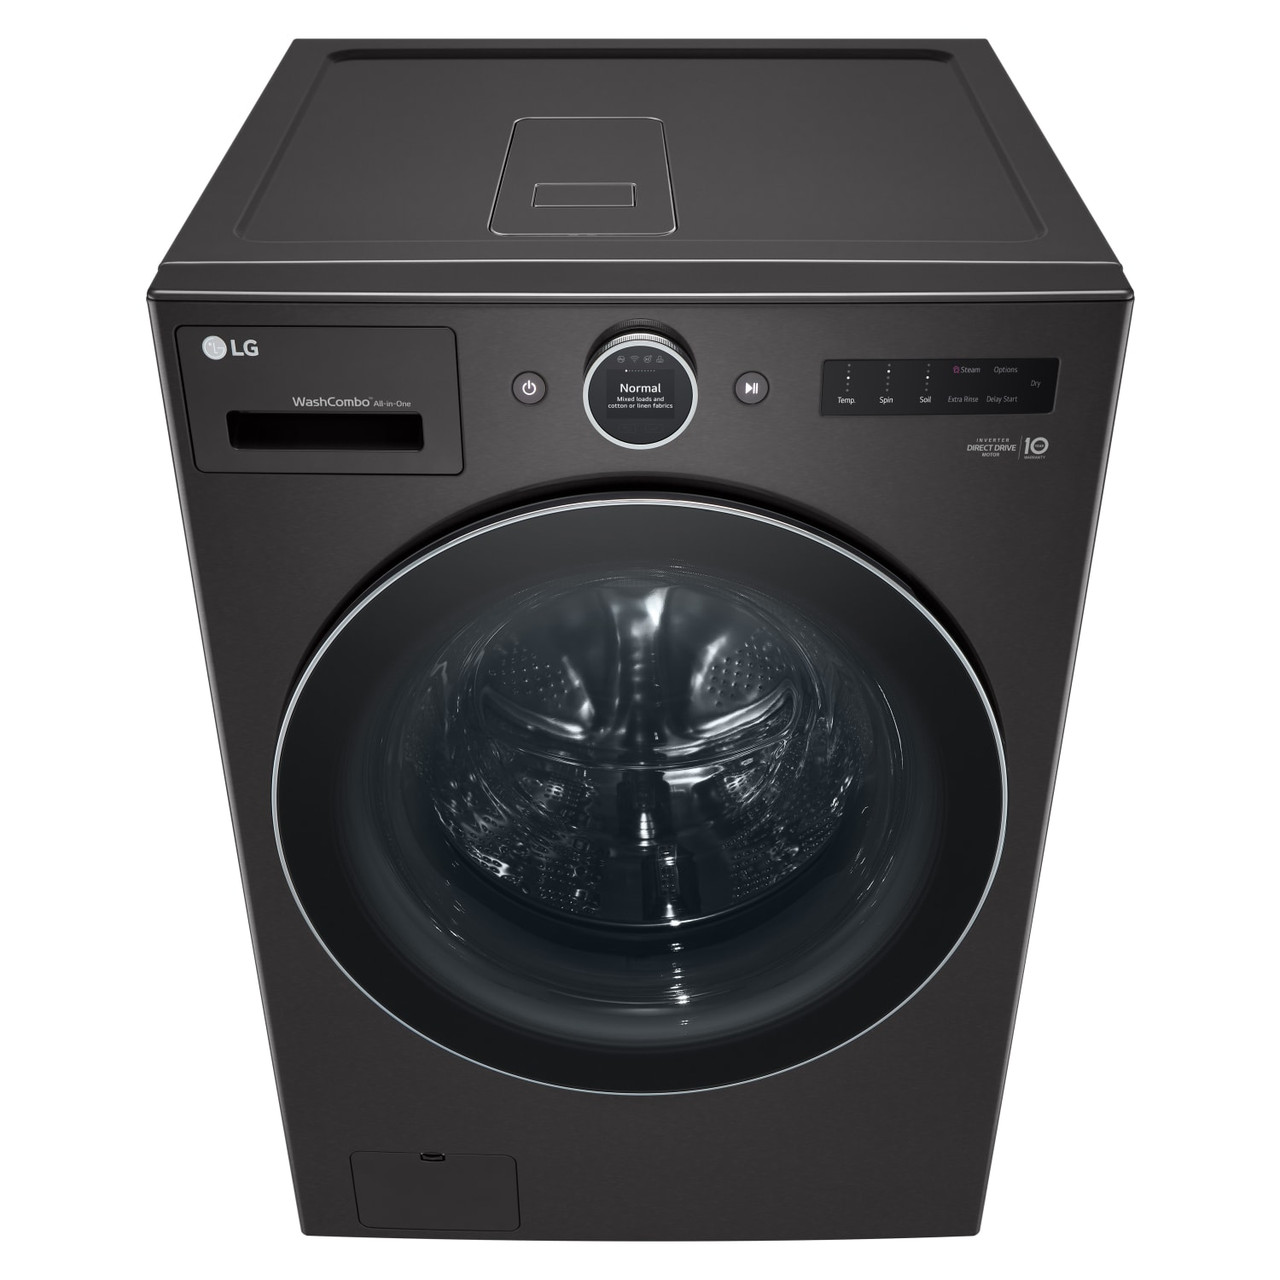 LG 5.0 cu. ft. Mega Capacity Smart WashCombo™ All-in-One Washer/Dryer with Inverter HeatPump™ Technology and Direct Drive Motor - WM6998HBA